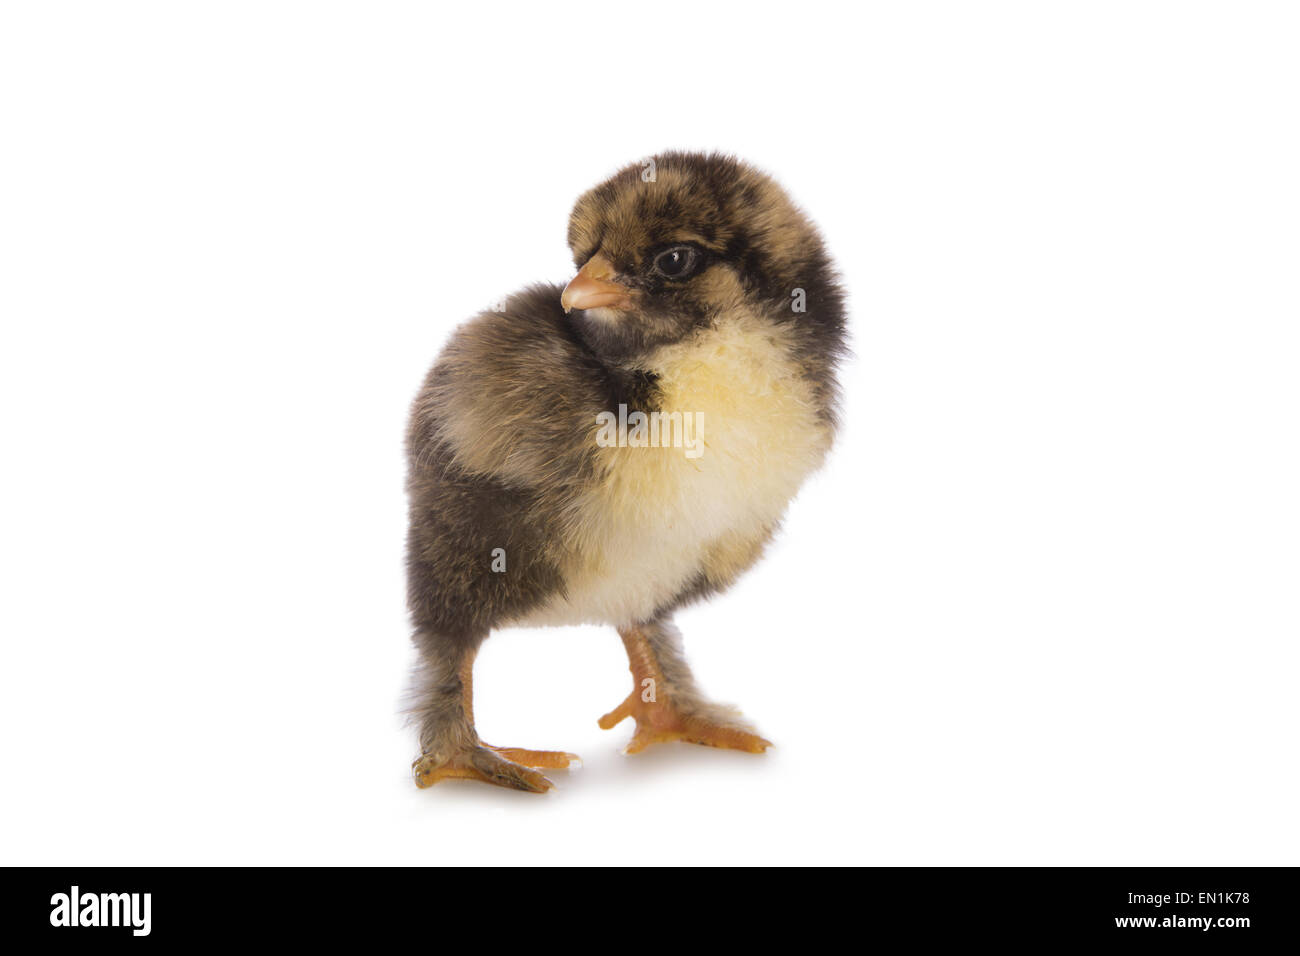 Gold laced Brahma chick isolated on white Stock Photo